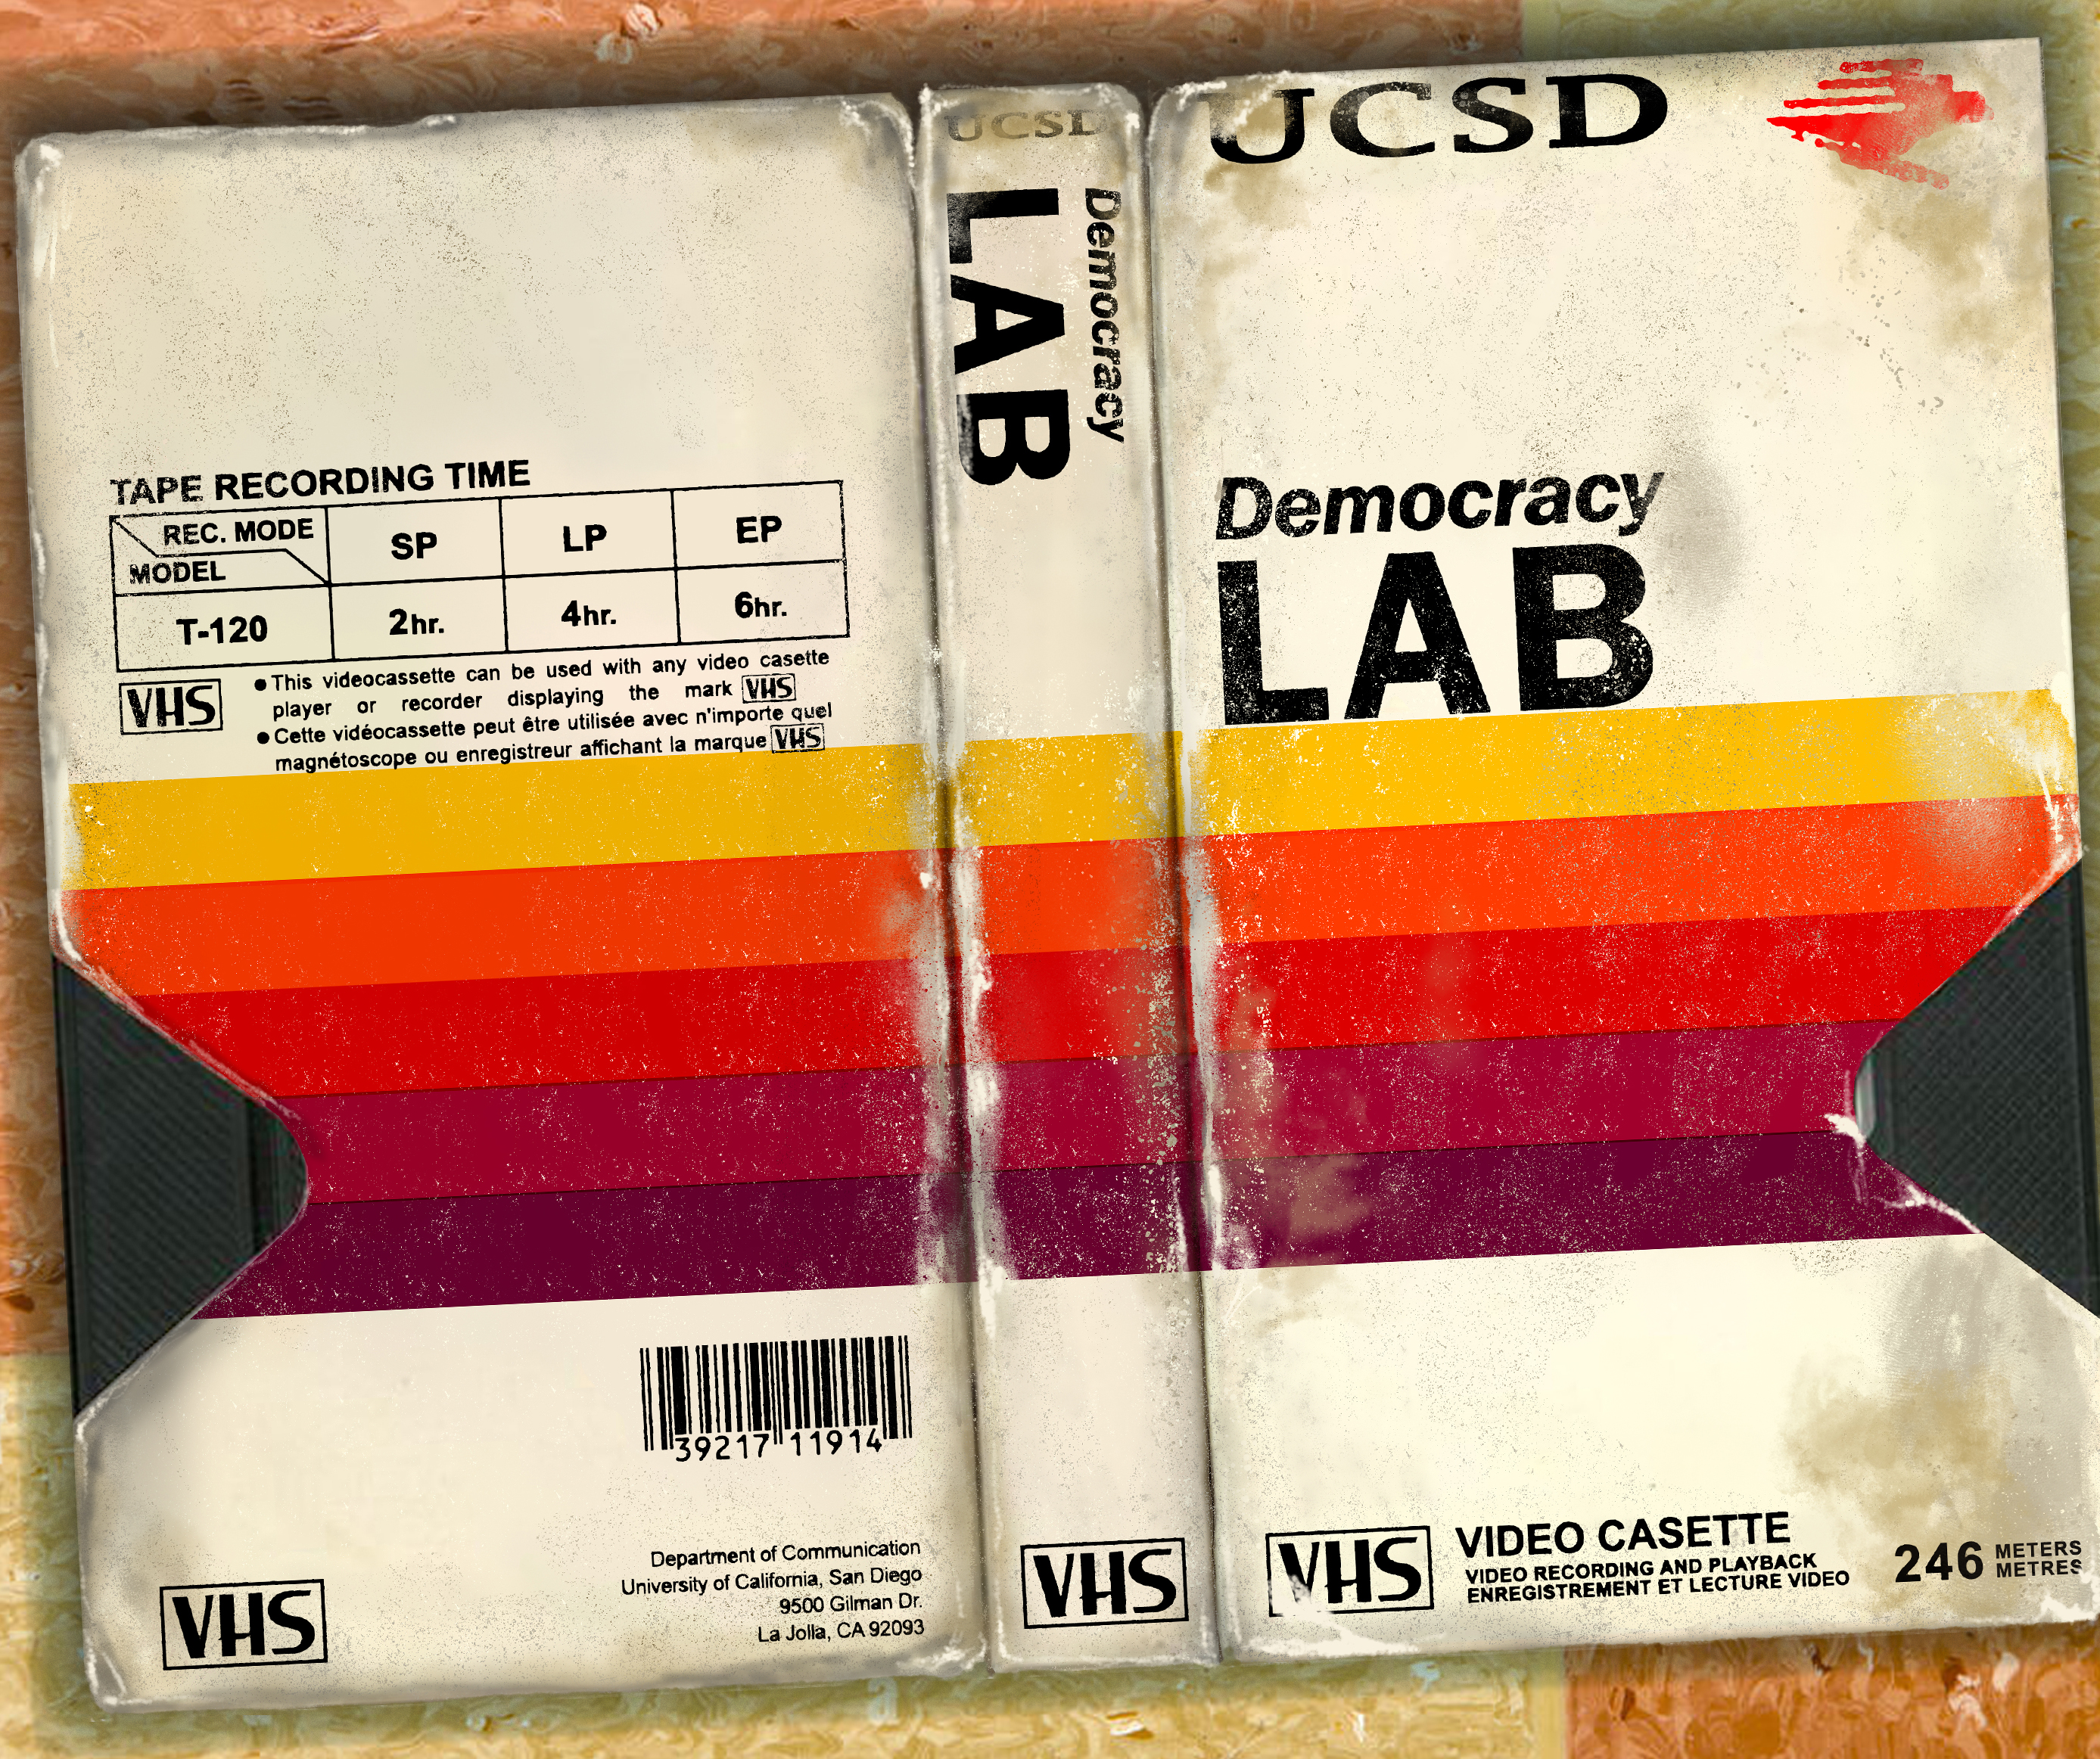 Vintage 80s blank VHS with "UCSD DEmocracy Lab" replacing original text